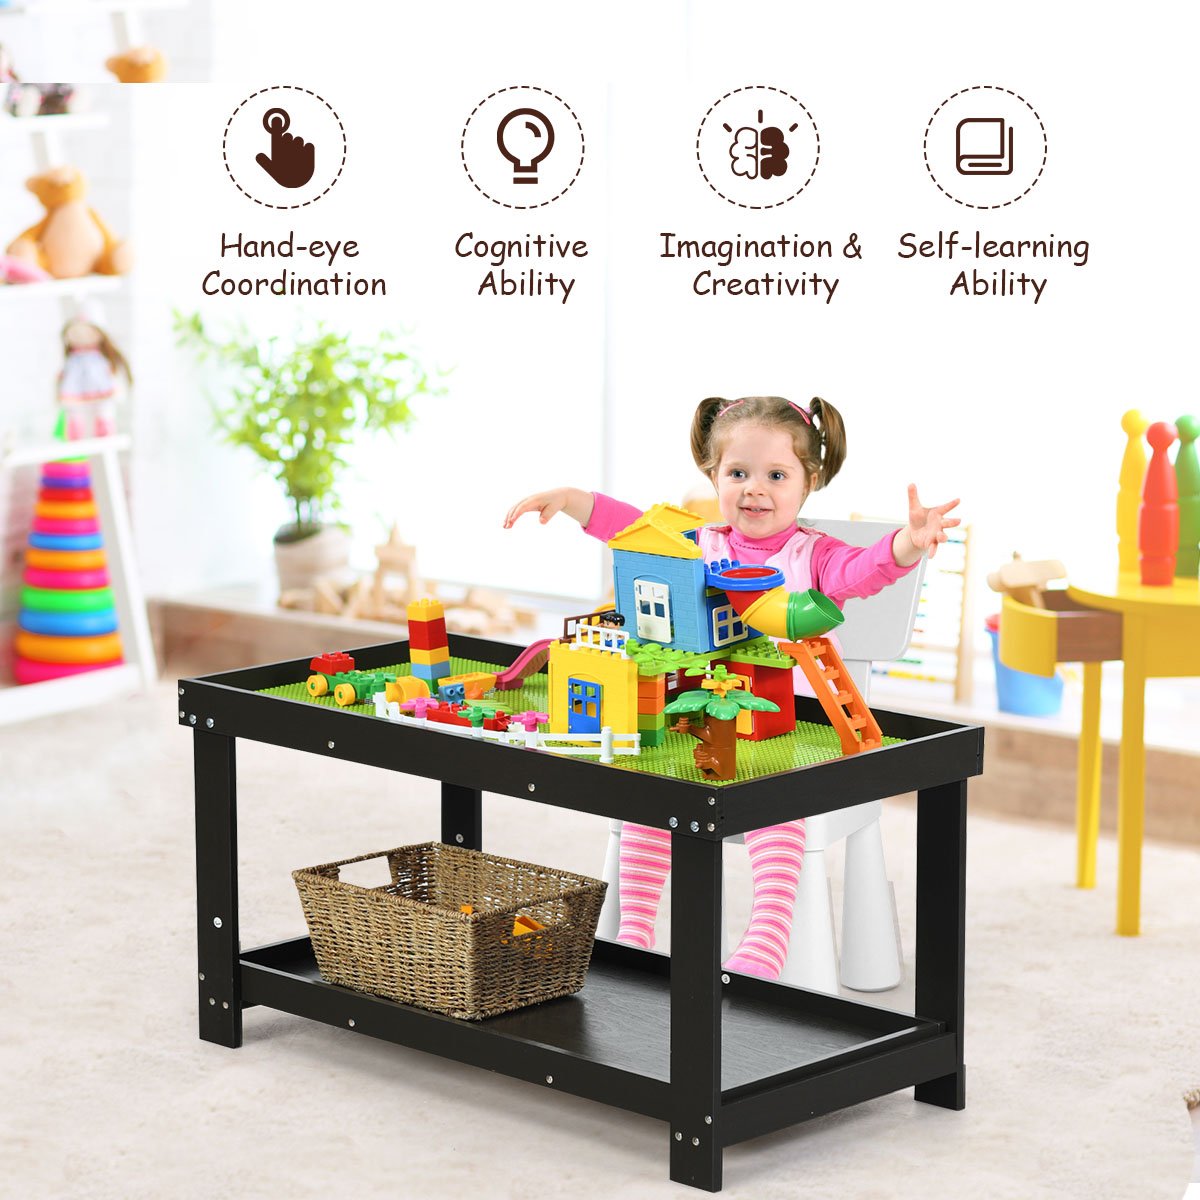 Playtime with Activity Table